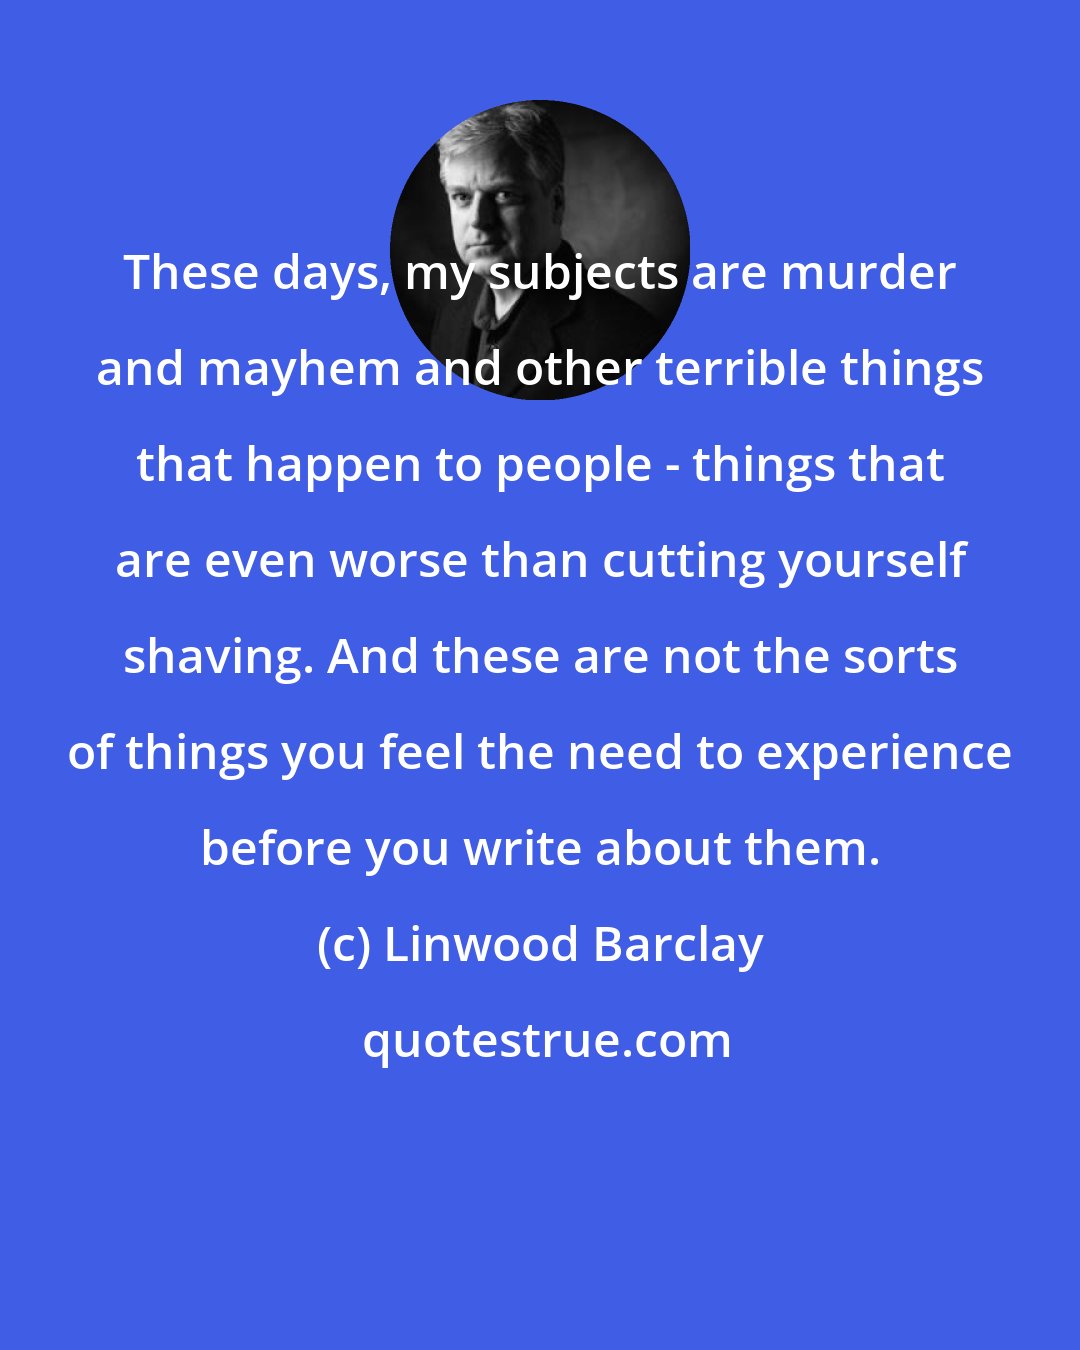 Linwood Barclay: These days, my subjects are murder and mayhem and other terrible things that happen to people - things that are even worse than cutting yourself shaving. And these are not the sorts of things you feel the need to experience before you write about them.